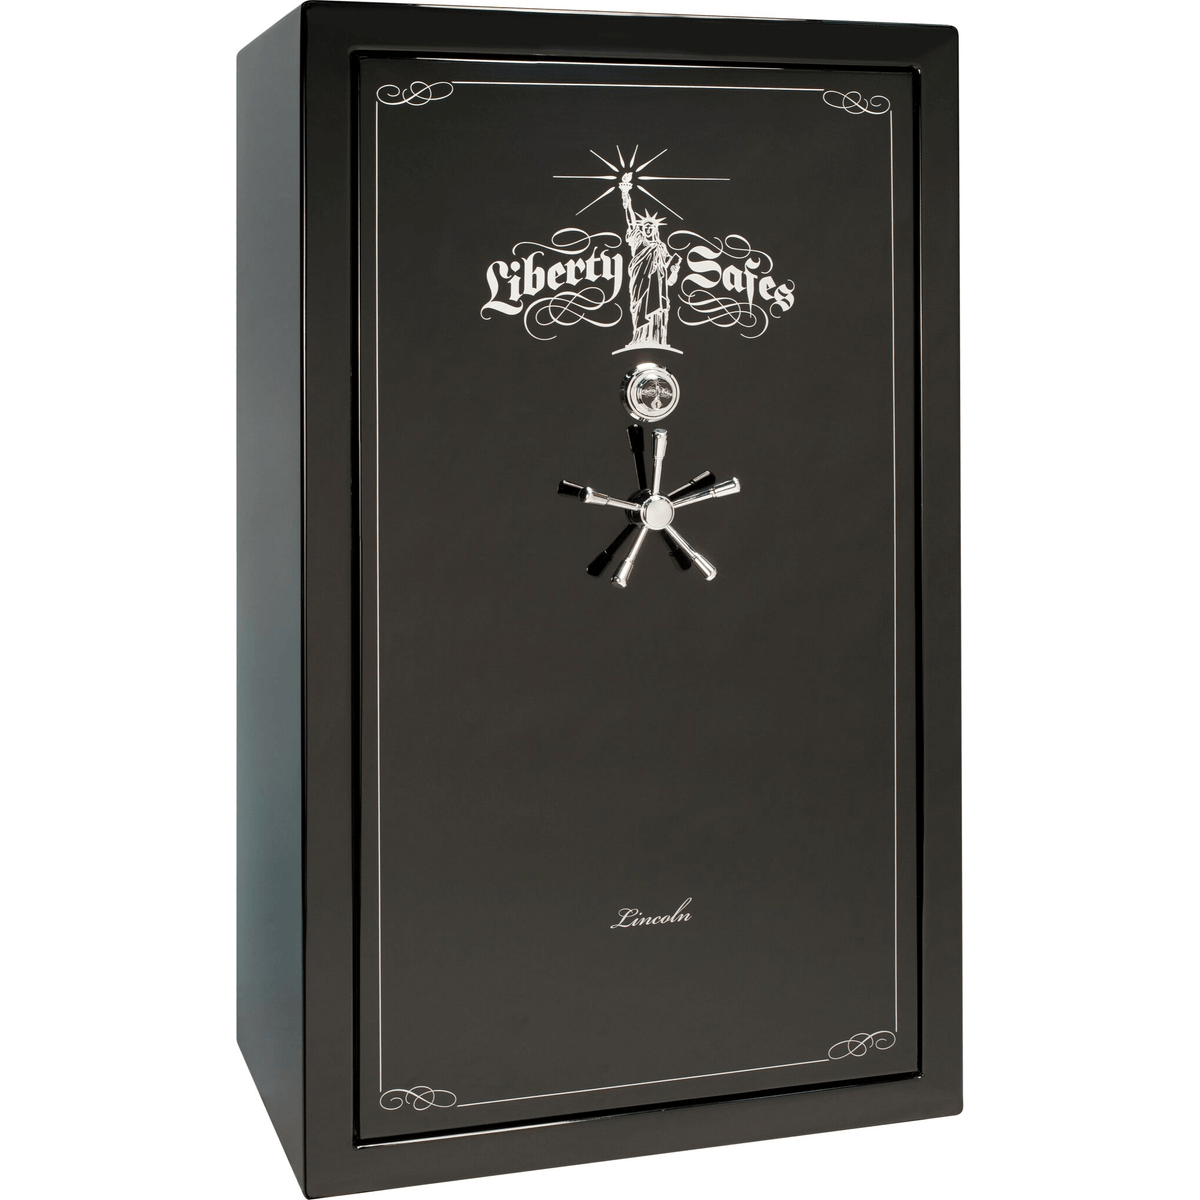 Liberty Lincoln 50 Safe in Black Gloss with Chrome Mechanical Lock.